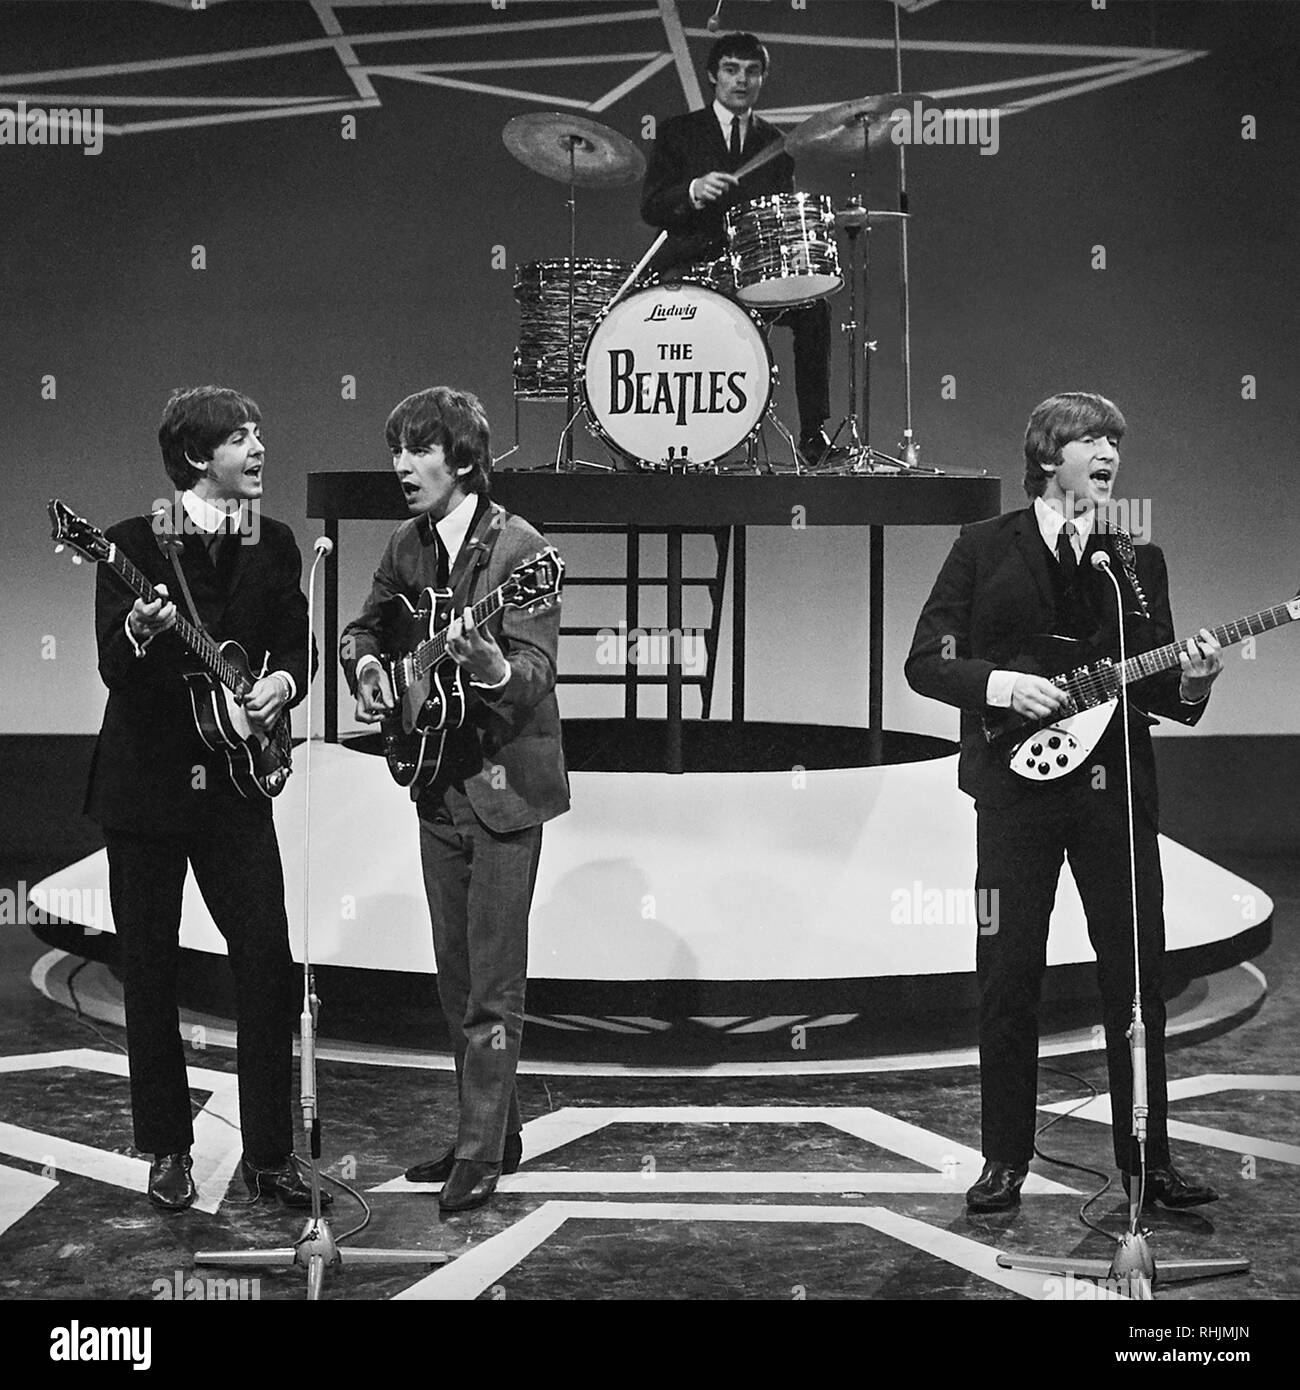 The Beatles television performance in Hiilegom, South Holland on June 5, 1964 at the beginning of their 1964 World Tour, just after performing in Copenhagen. Jimmie Nicol sat in for drummer Ringo Starr for a two week period while Ringo was out with tonsillitis. Stock Photo